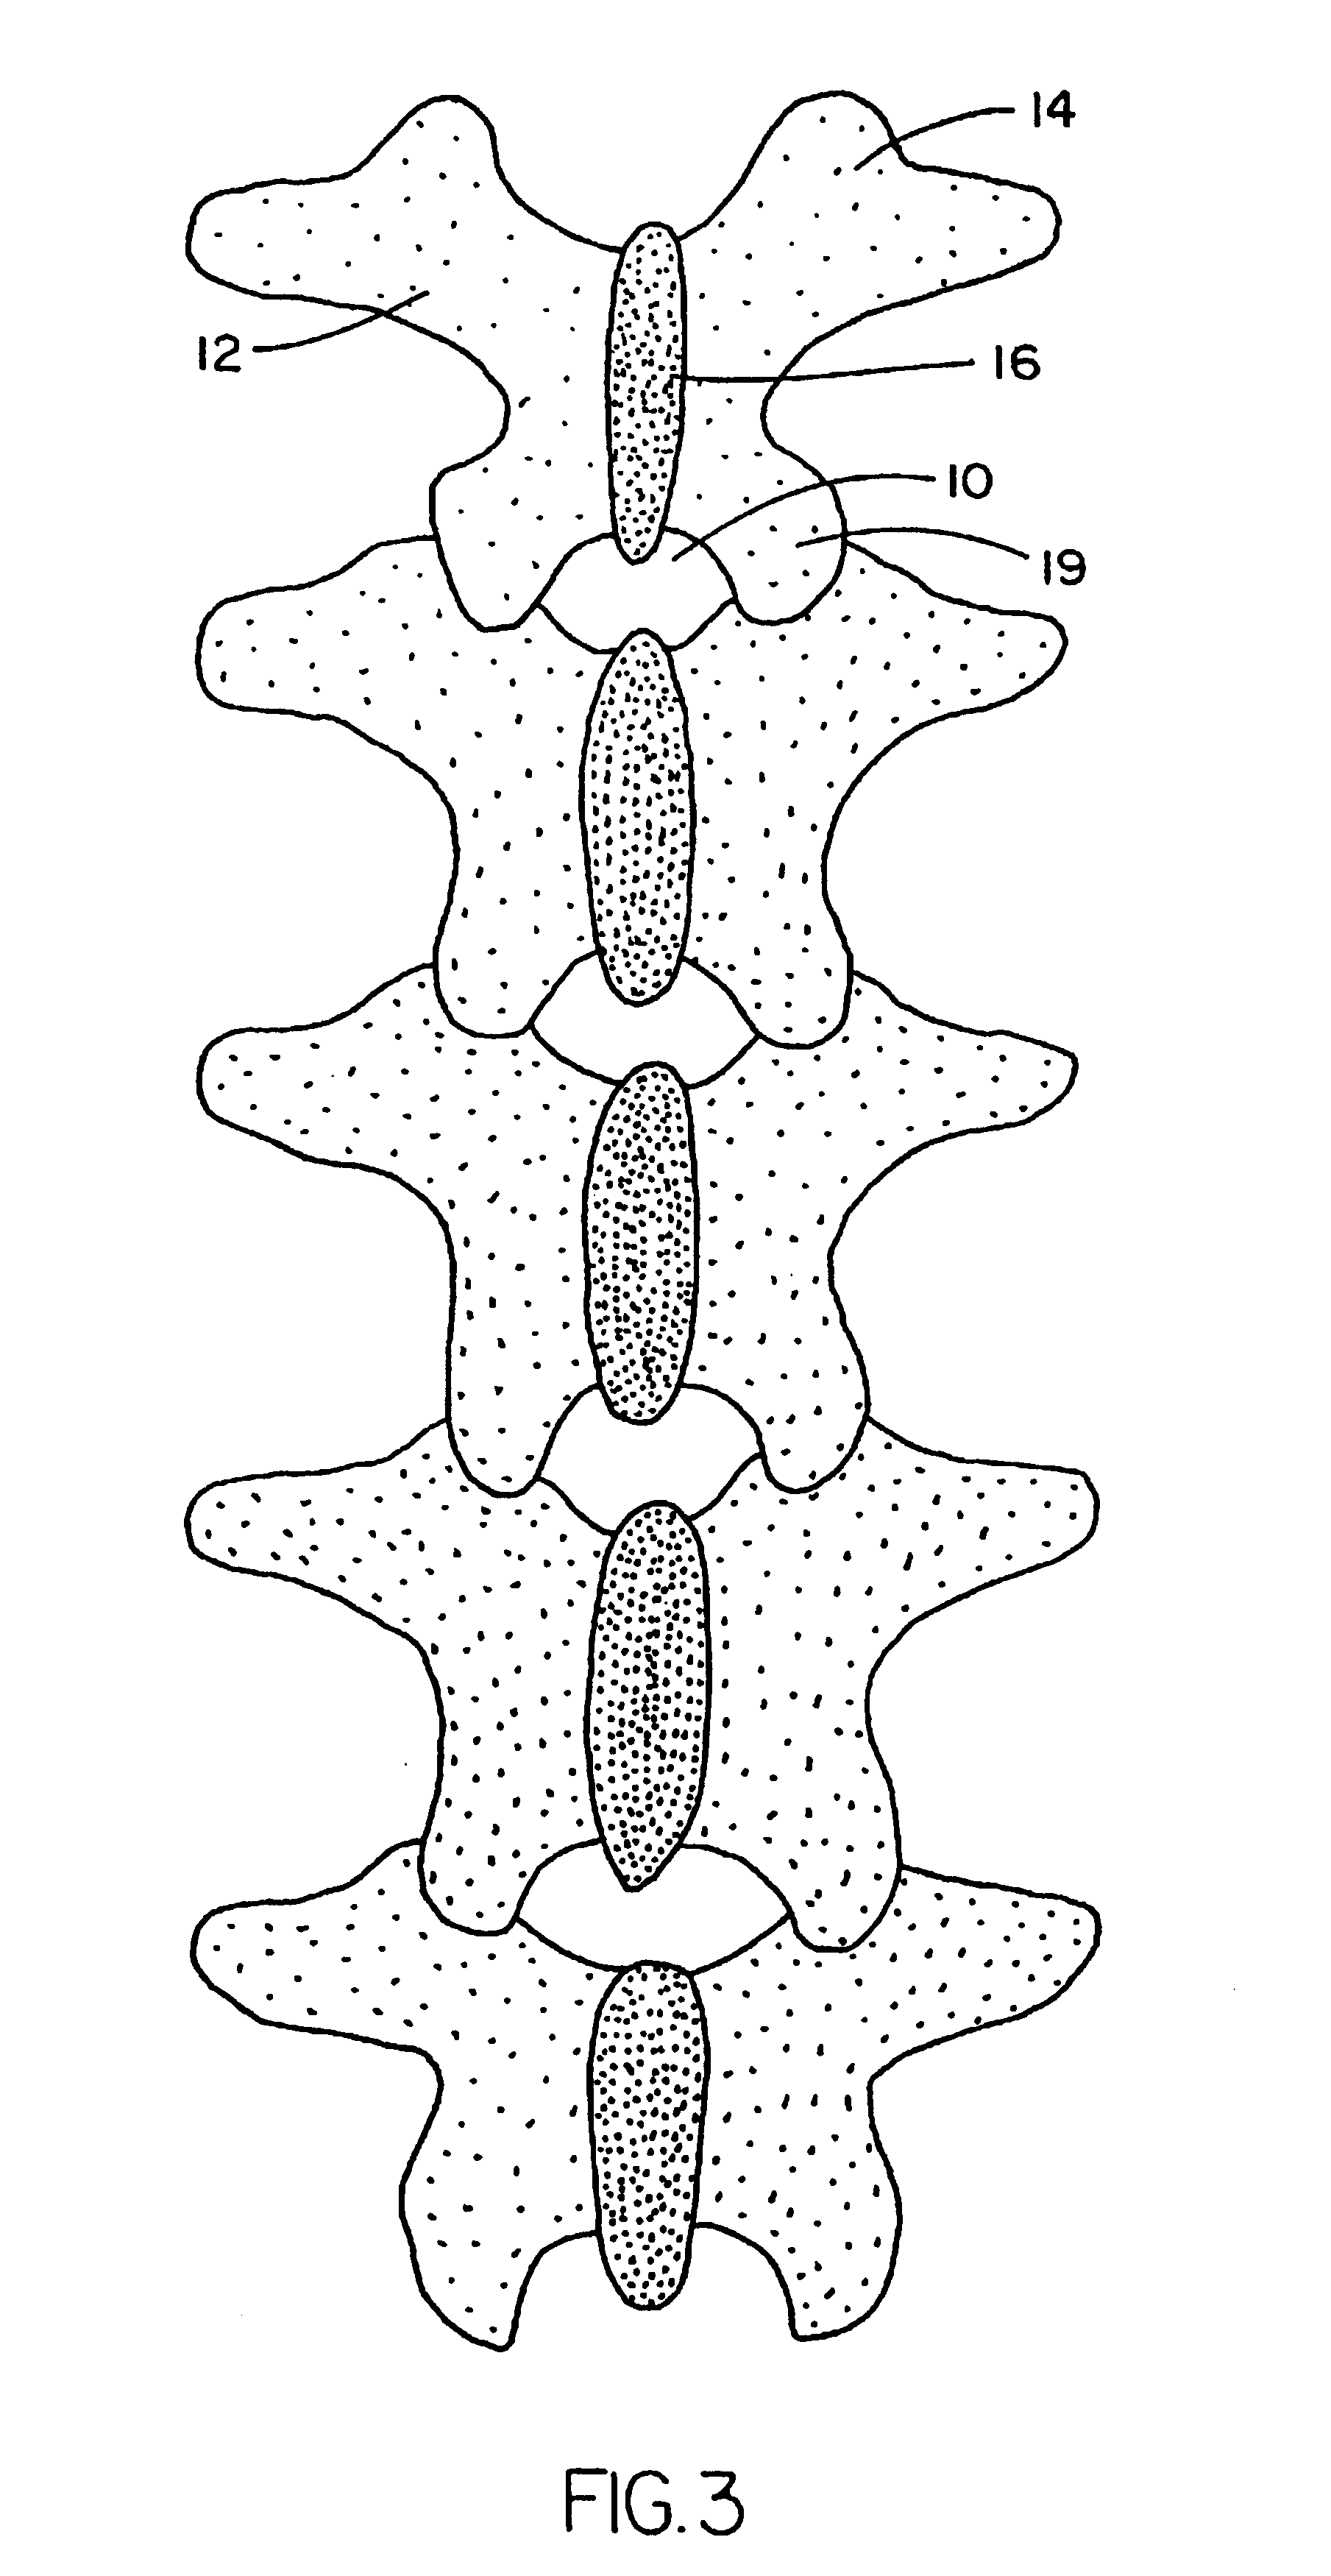 Polyaxial pedicle screw having a threaded and tapered compression locking mechanism